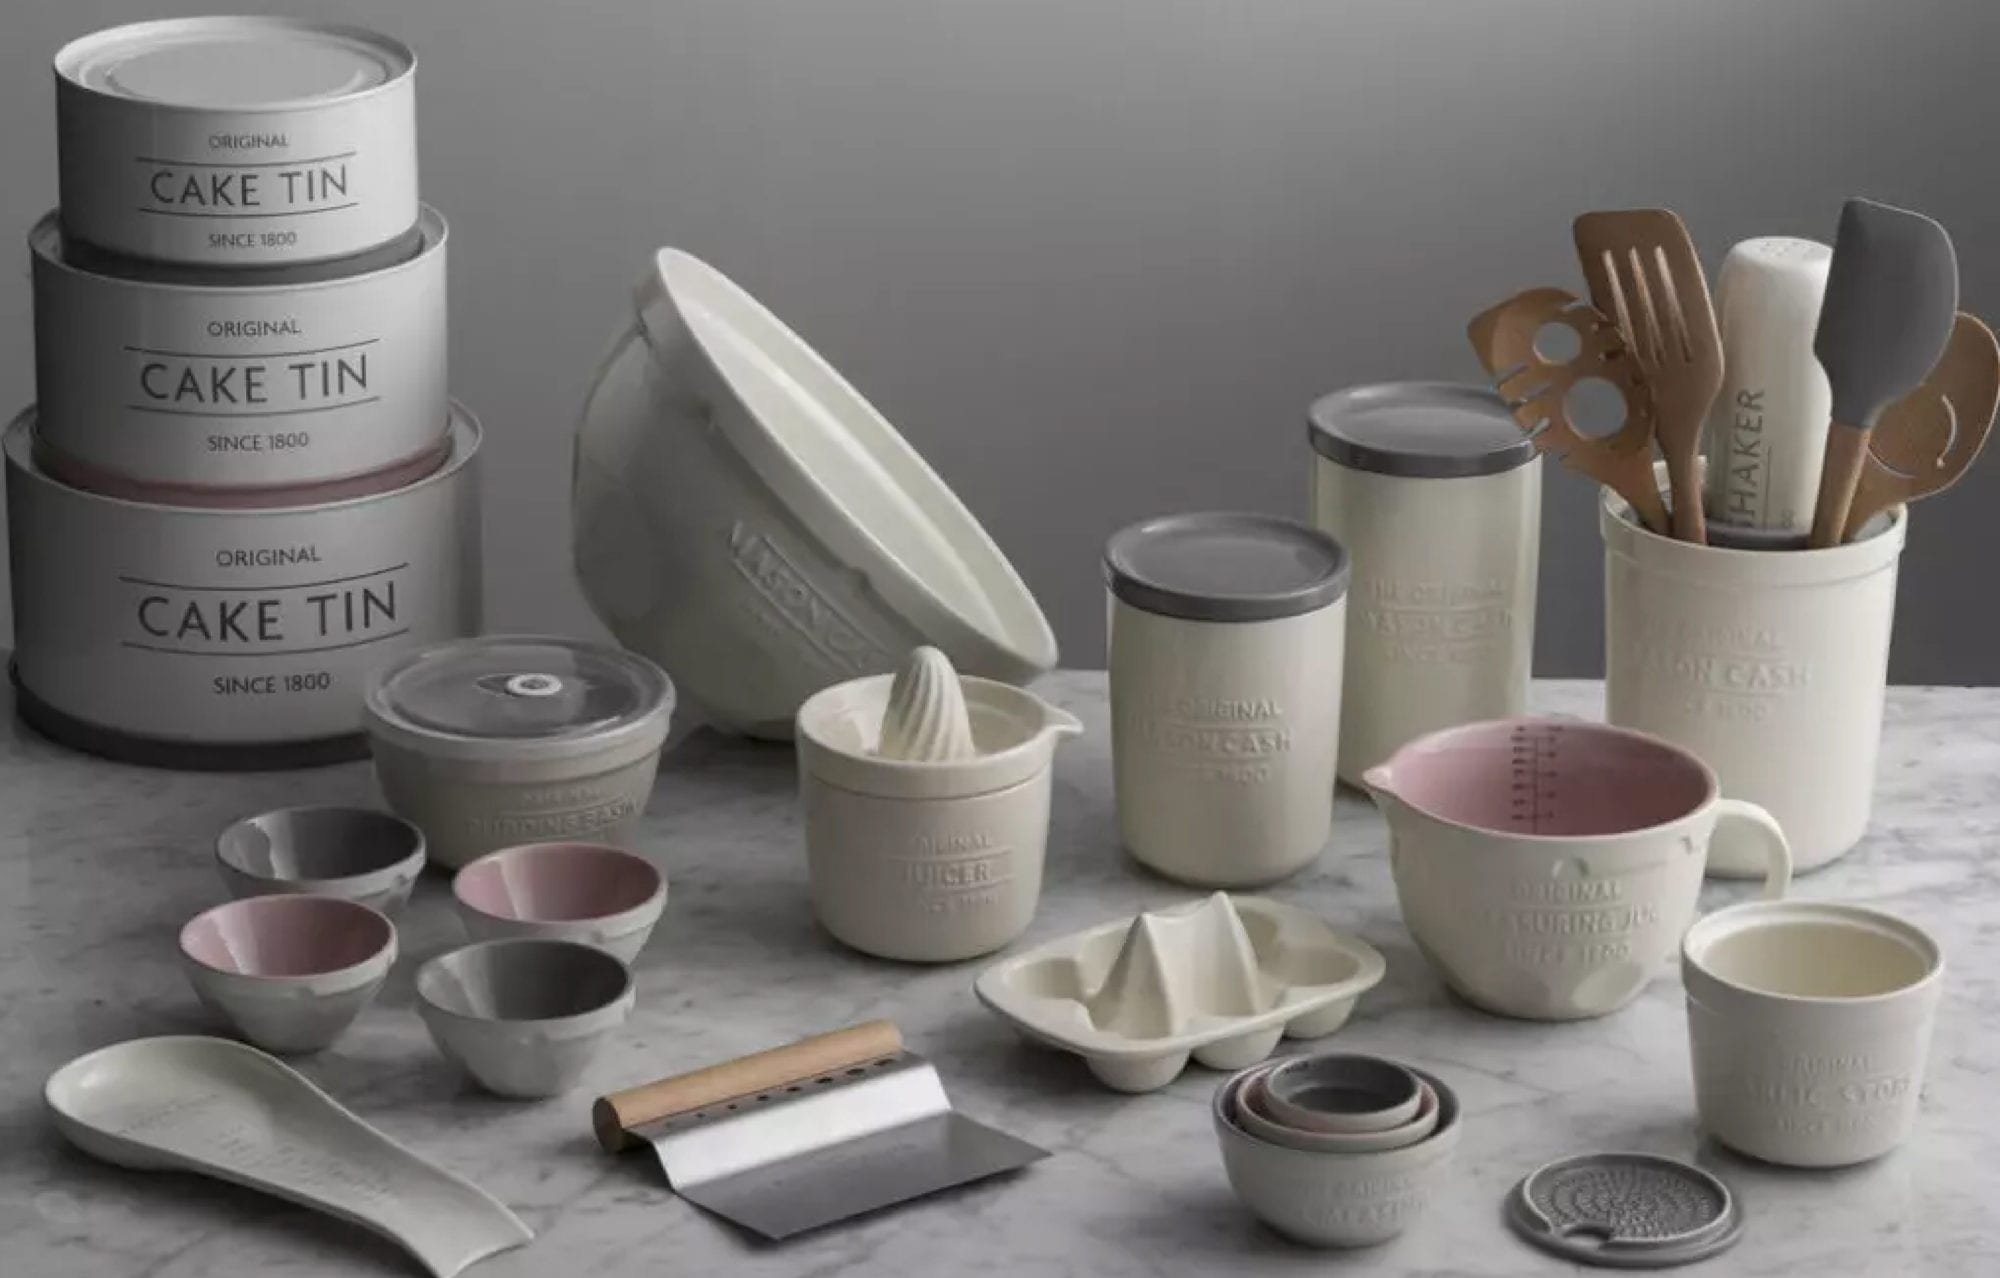 Silver Mushroom and 3PL partner to bring homeware to more shoppers